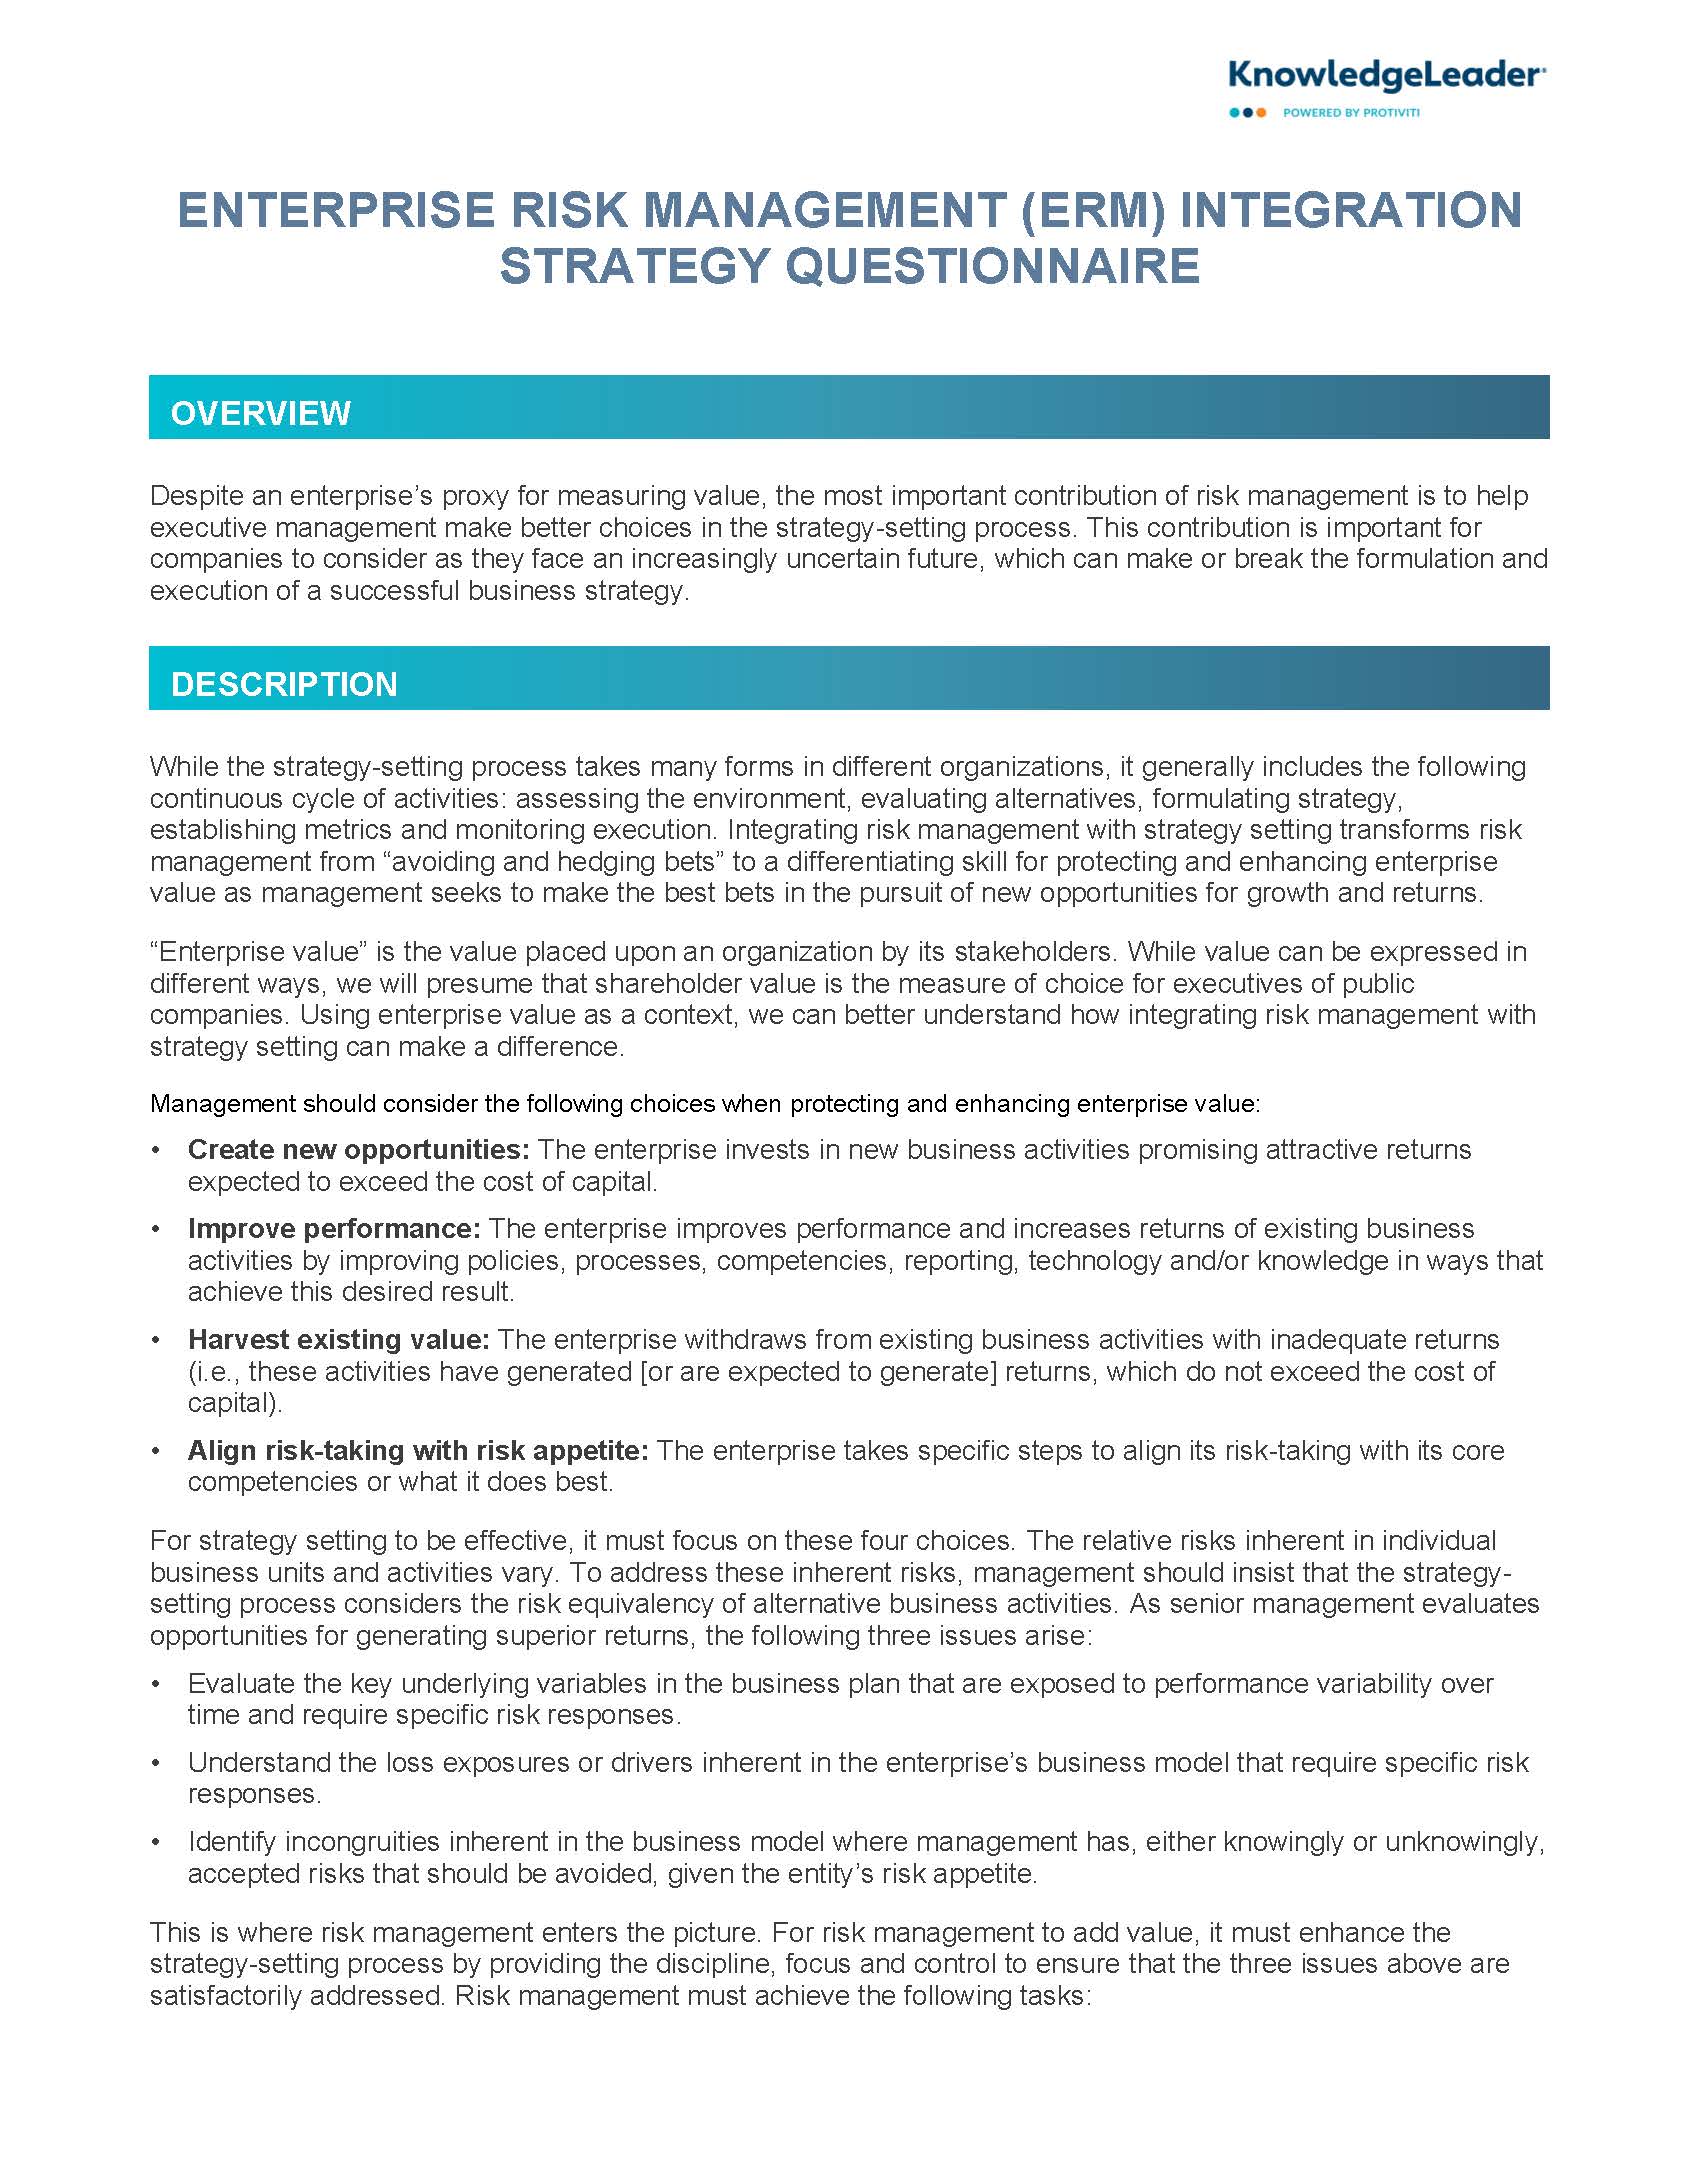 Screenshot of the first page of Enterprise Risk Management (ERM) Integration Strategy Questionnaire